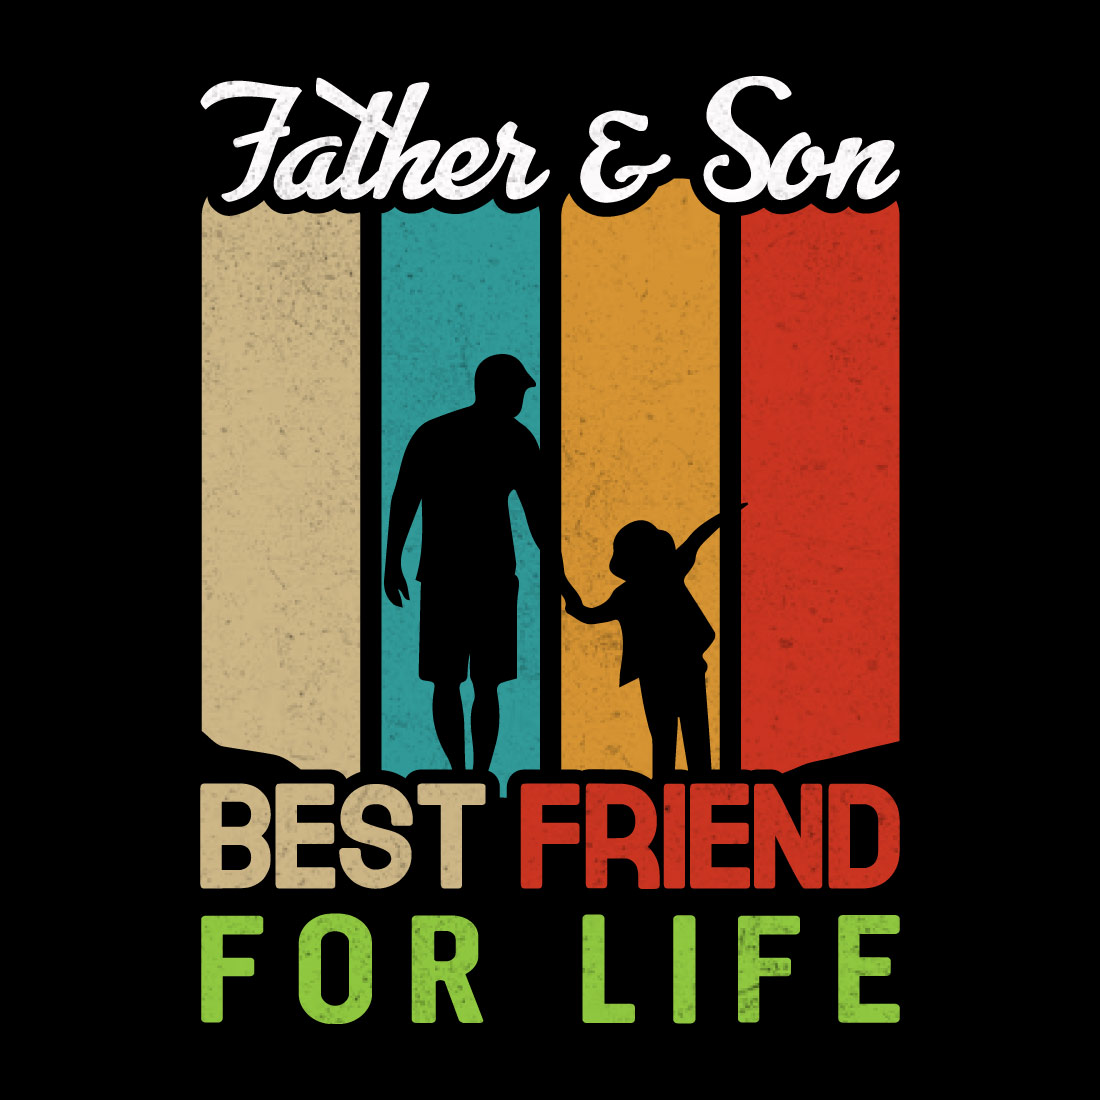 fathers day t shirt dad t shirt design father day tshirt happy fathers day t shirt design ideas dad day papa son fathers day shirt ideas for family 12 464